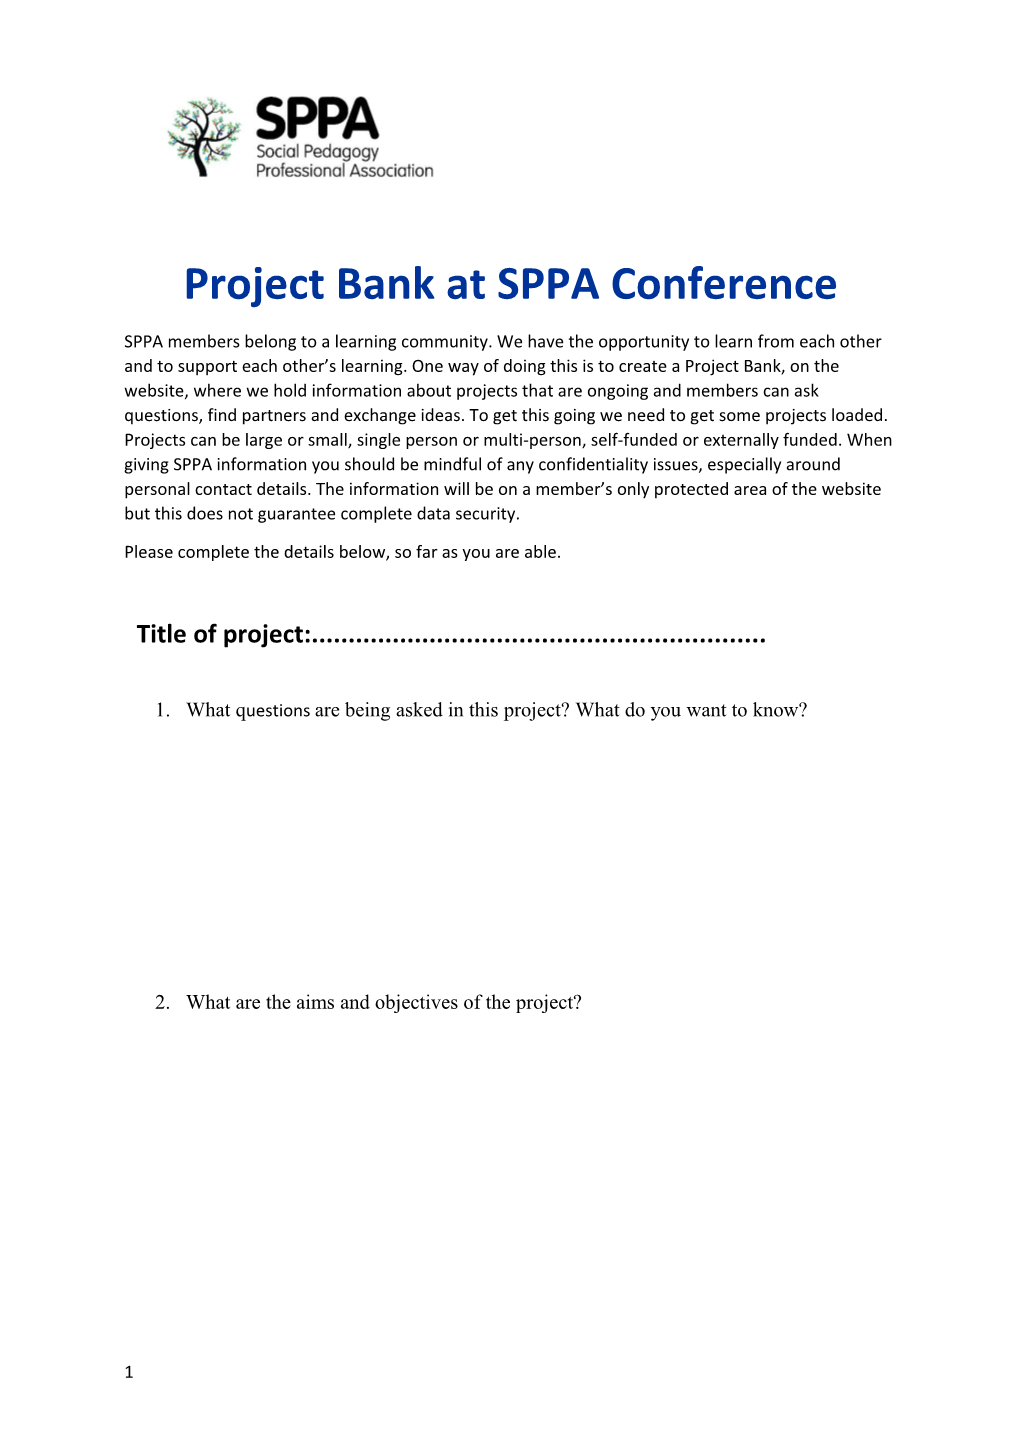 Project Bank at SPPA Conference